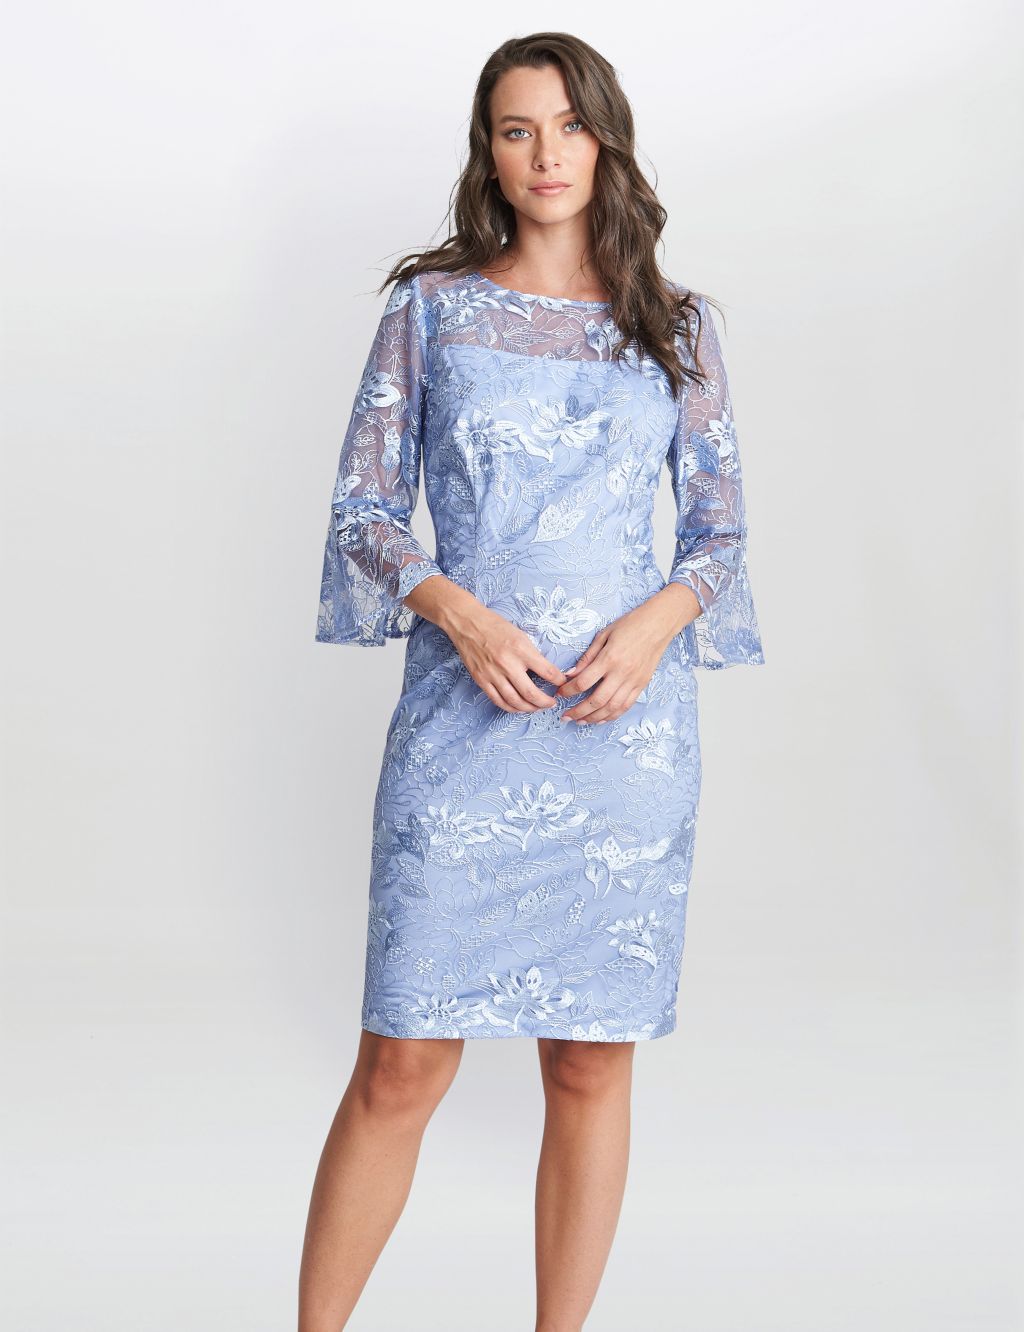 Embroidered Lace Knee Length Shift Dress | Gina Bacconi | M&S